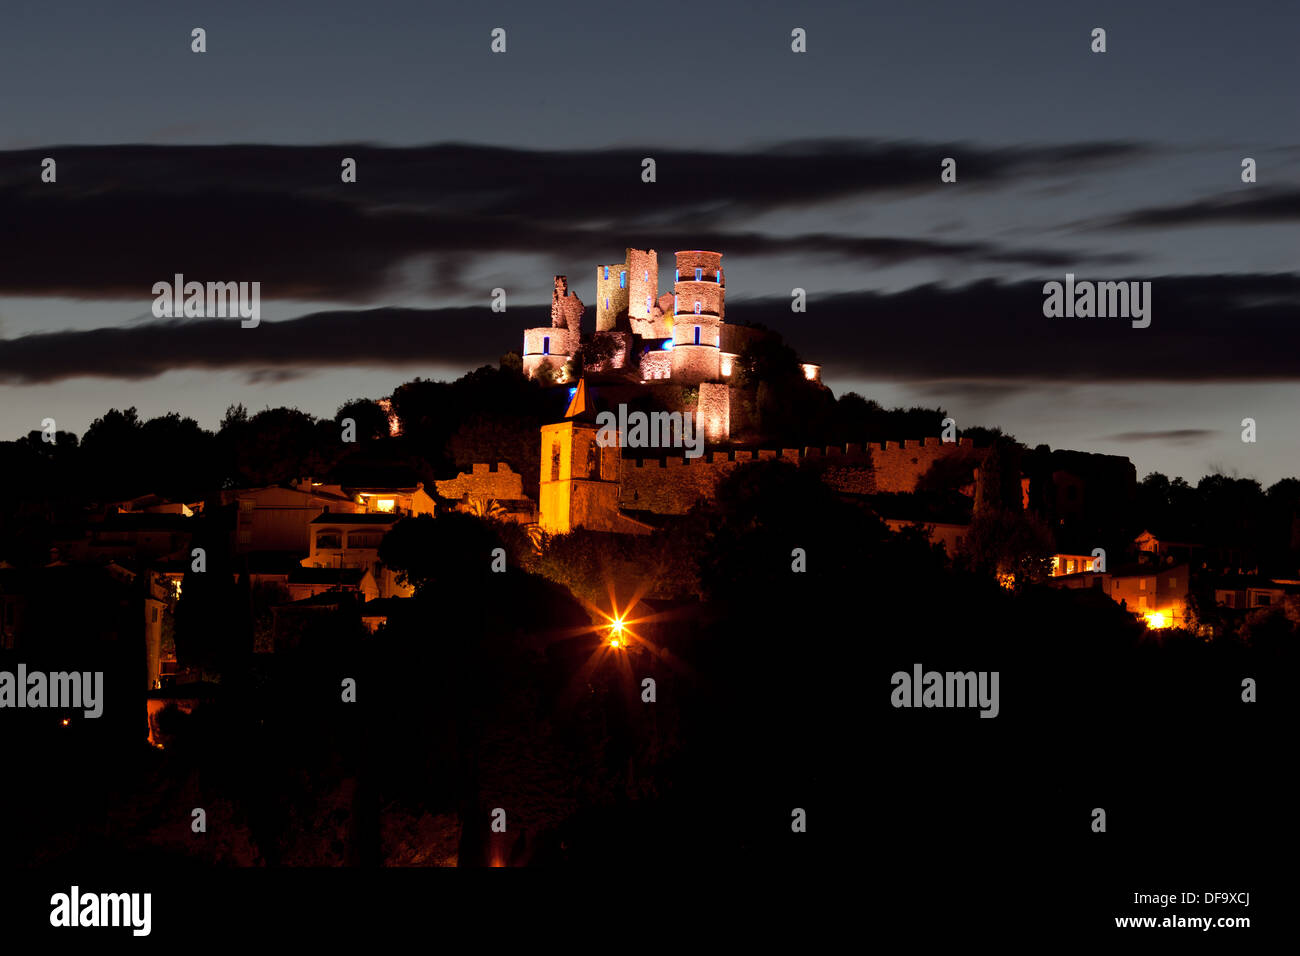 Time exposure of a perched medieval castle at dusk. Grimaud Castle, Var, French Riviera, Provence, France. Stock Photo